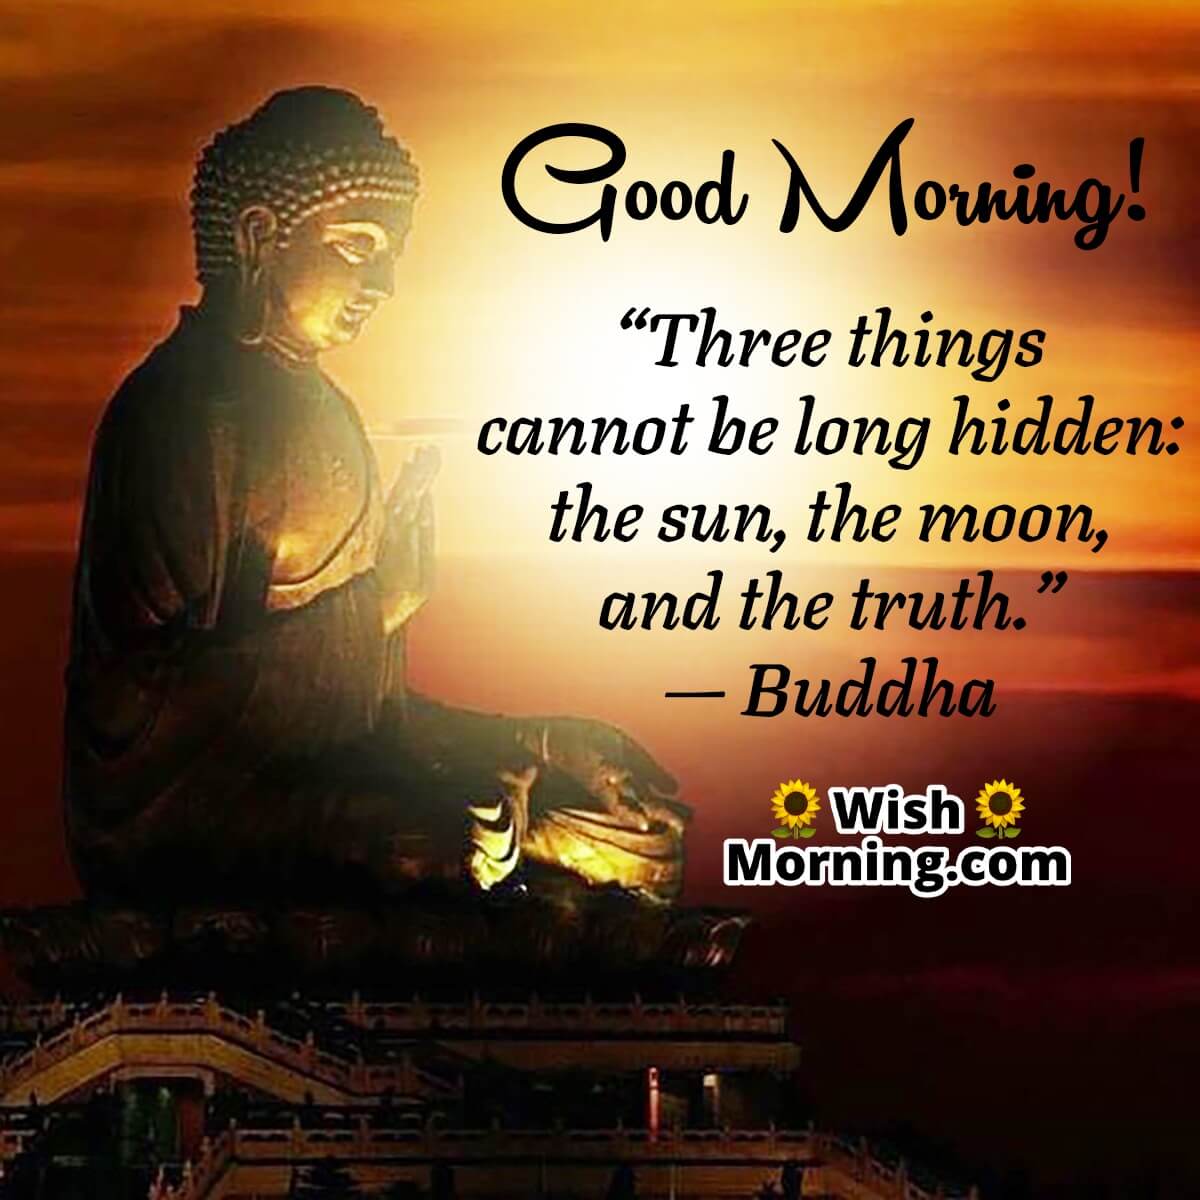 Good Morning Buddha Quotes Images